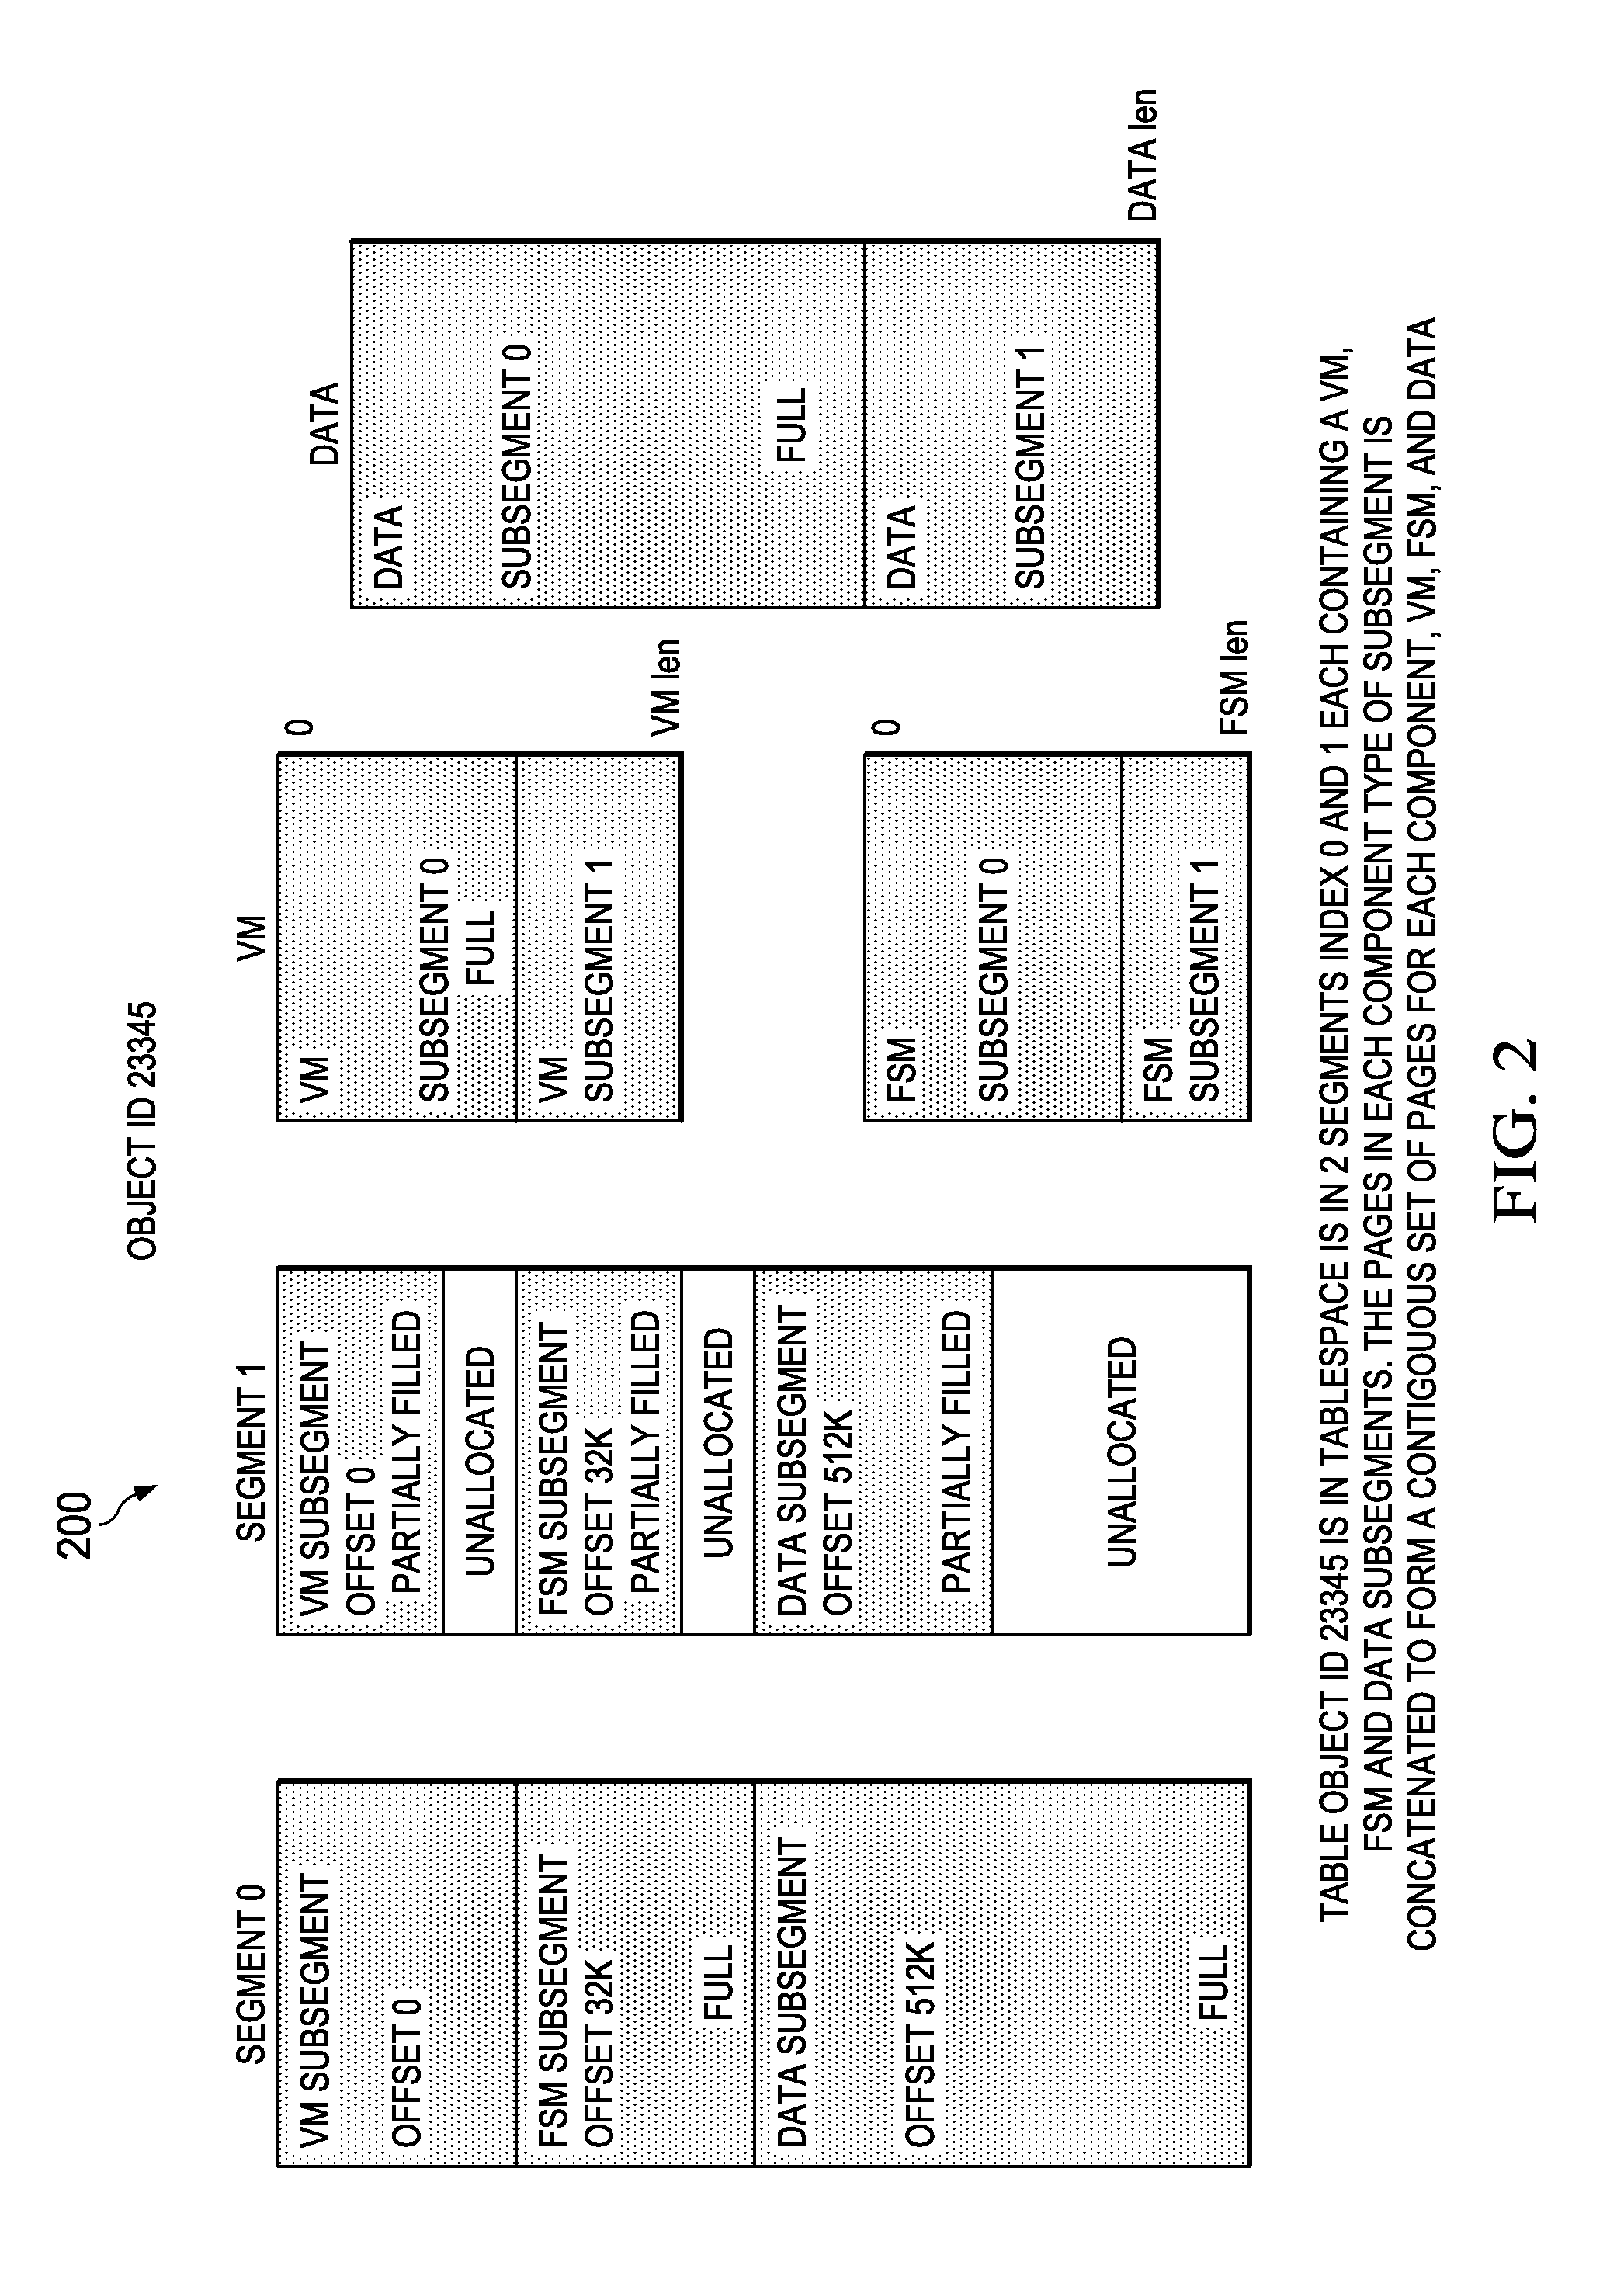 System and Method for an Efficient Database Storage Model Based on Sparse Files